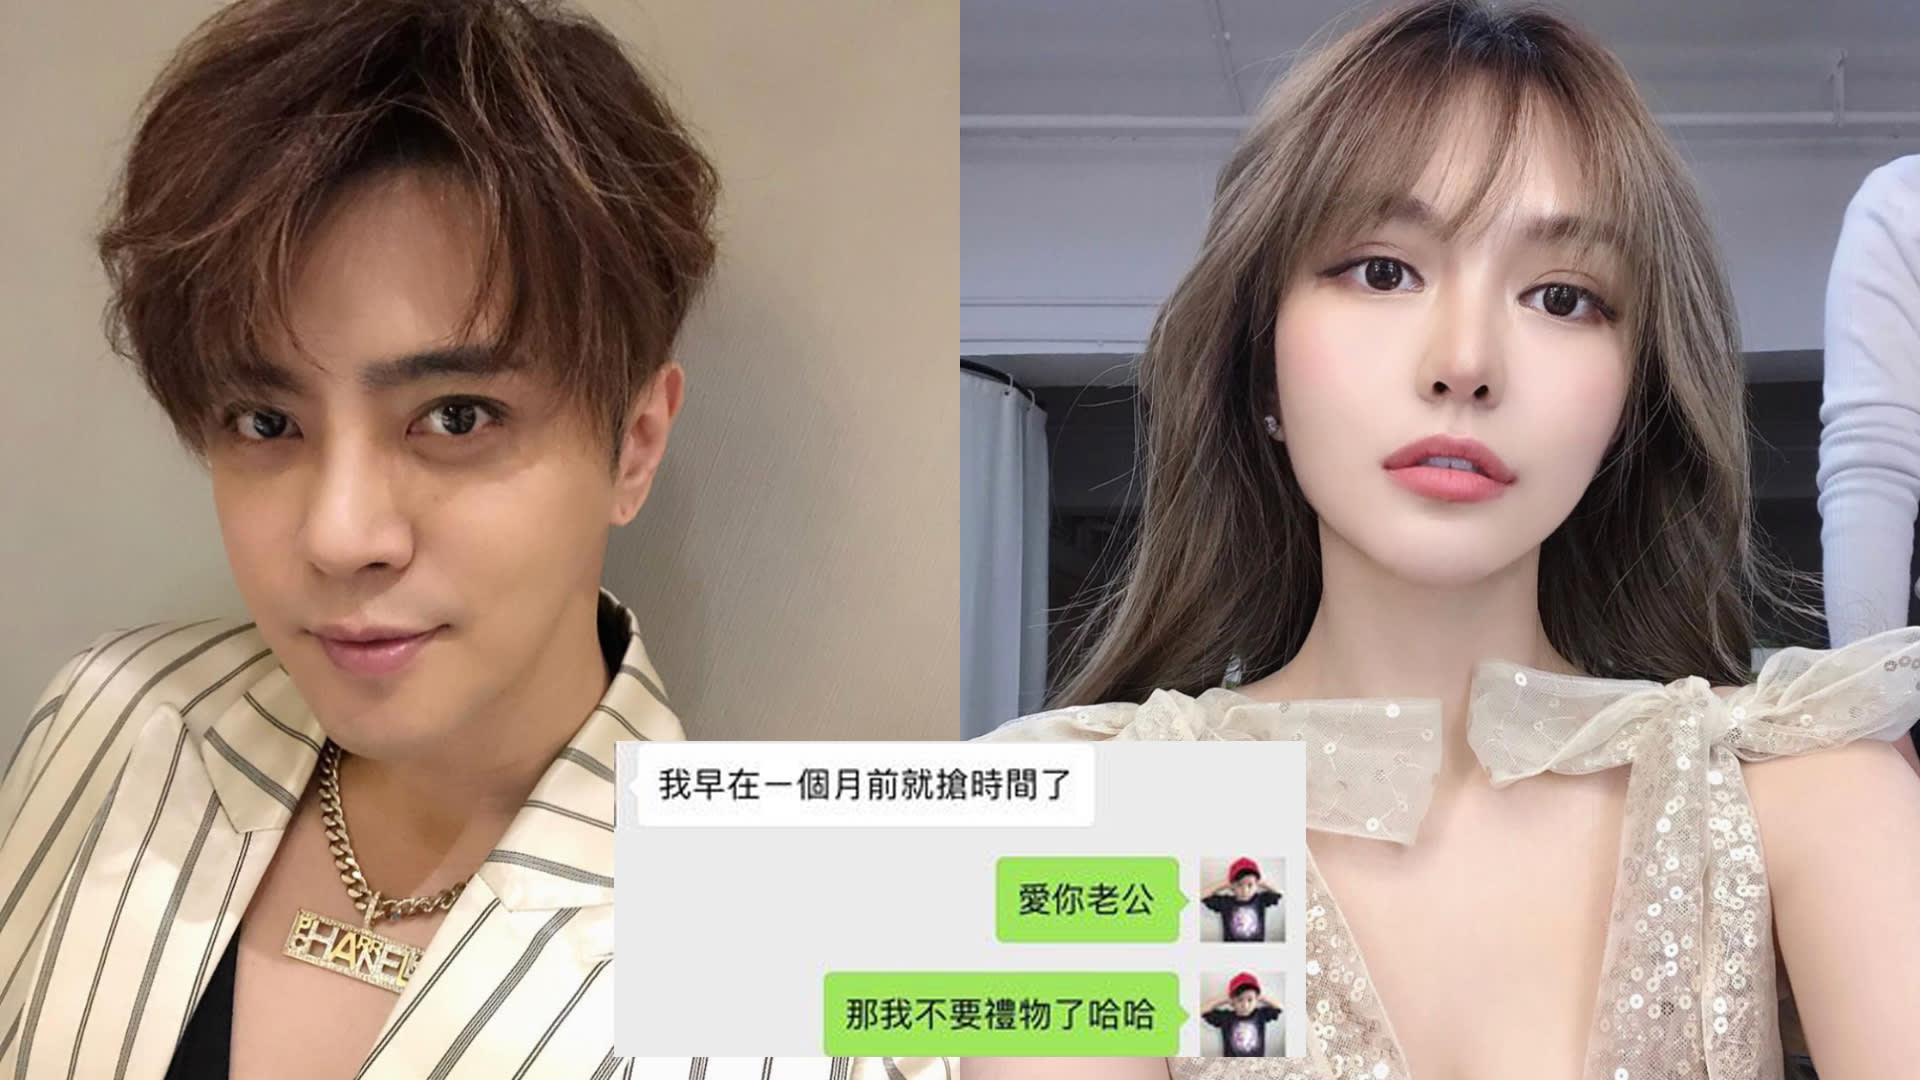 Screenshots Of Private Texts Between Show Luo And Ex-Girlfriend Have Surfaced, And They’re Actually Pretty Sweet